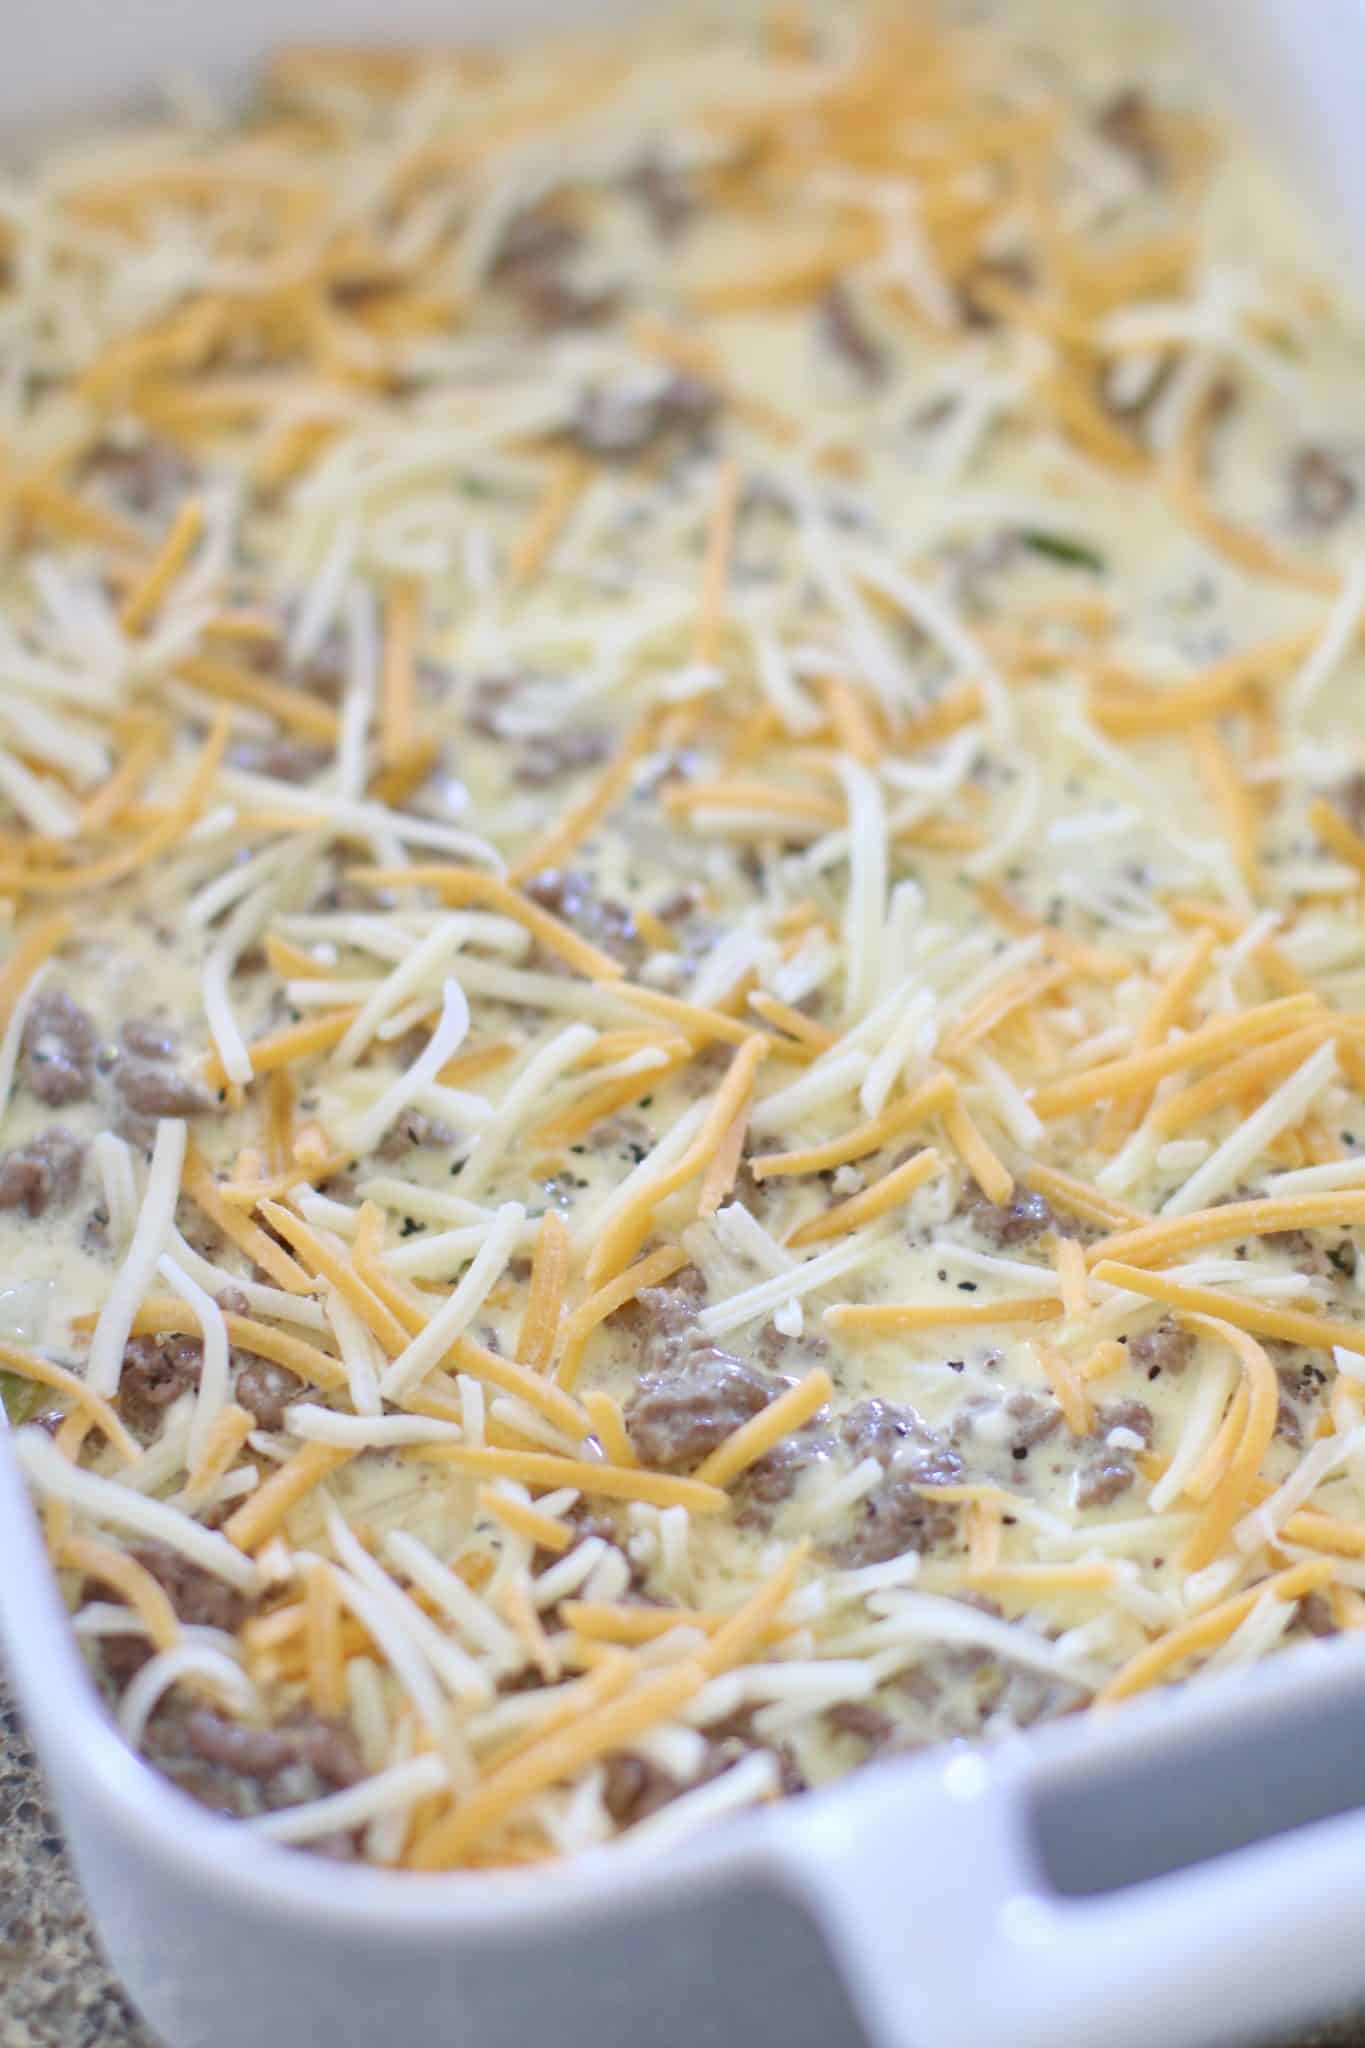 shredded cheese evenly sprinkled over ground beef mixture in baking dish.